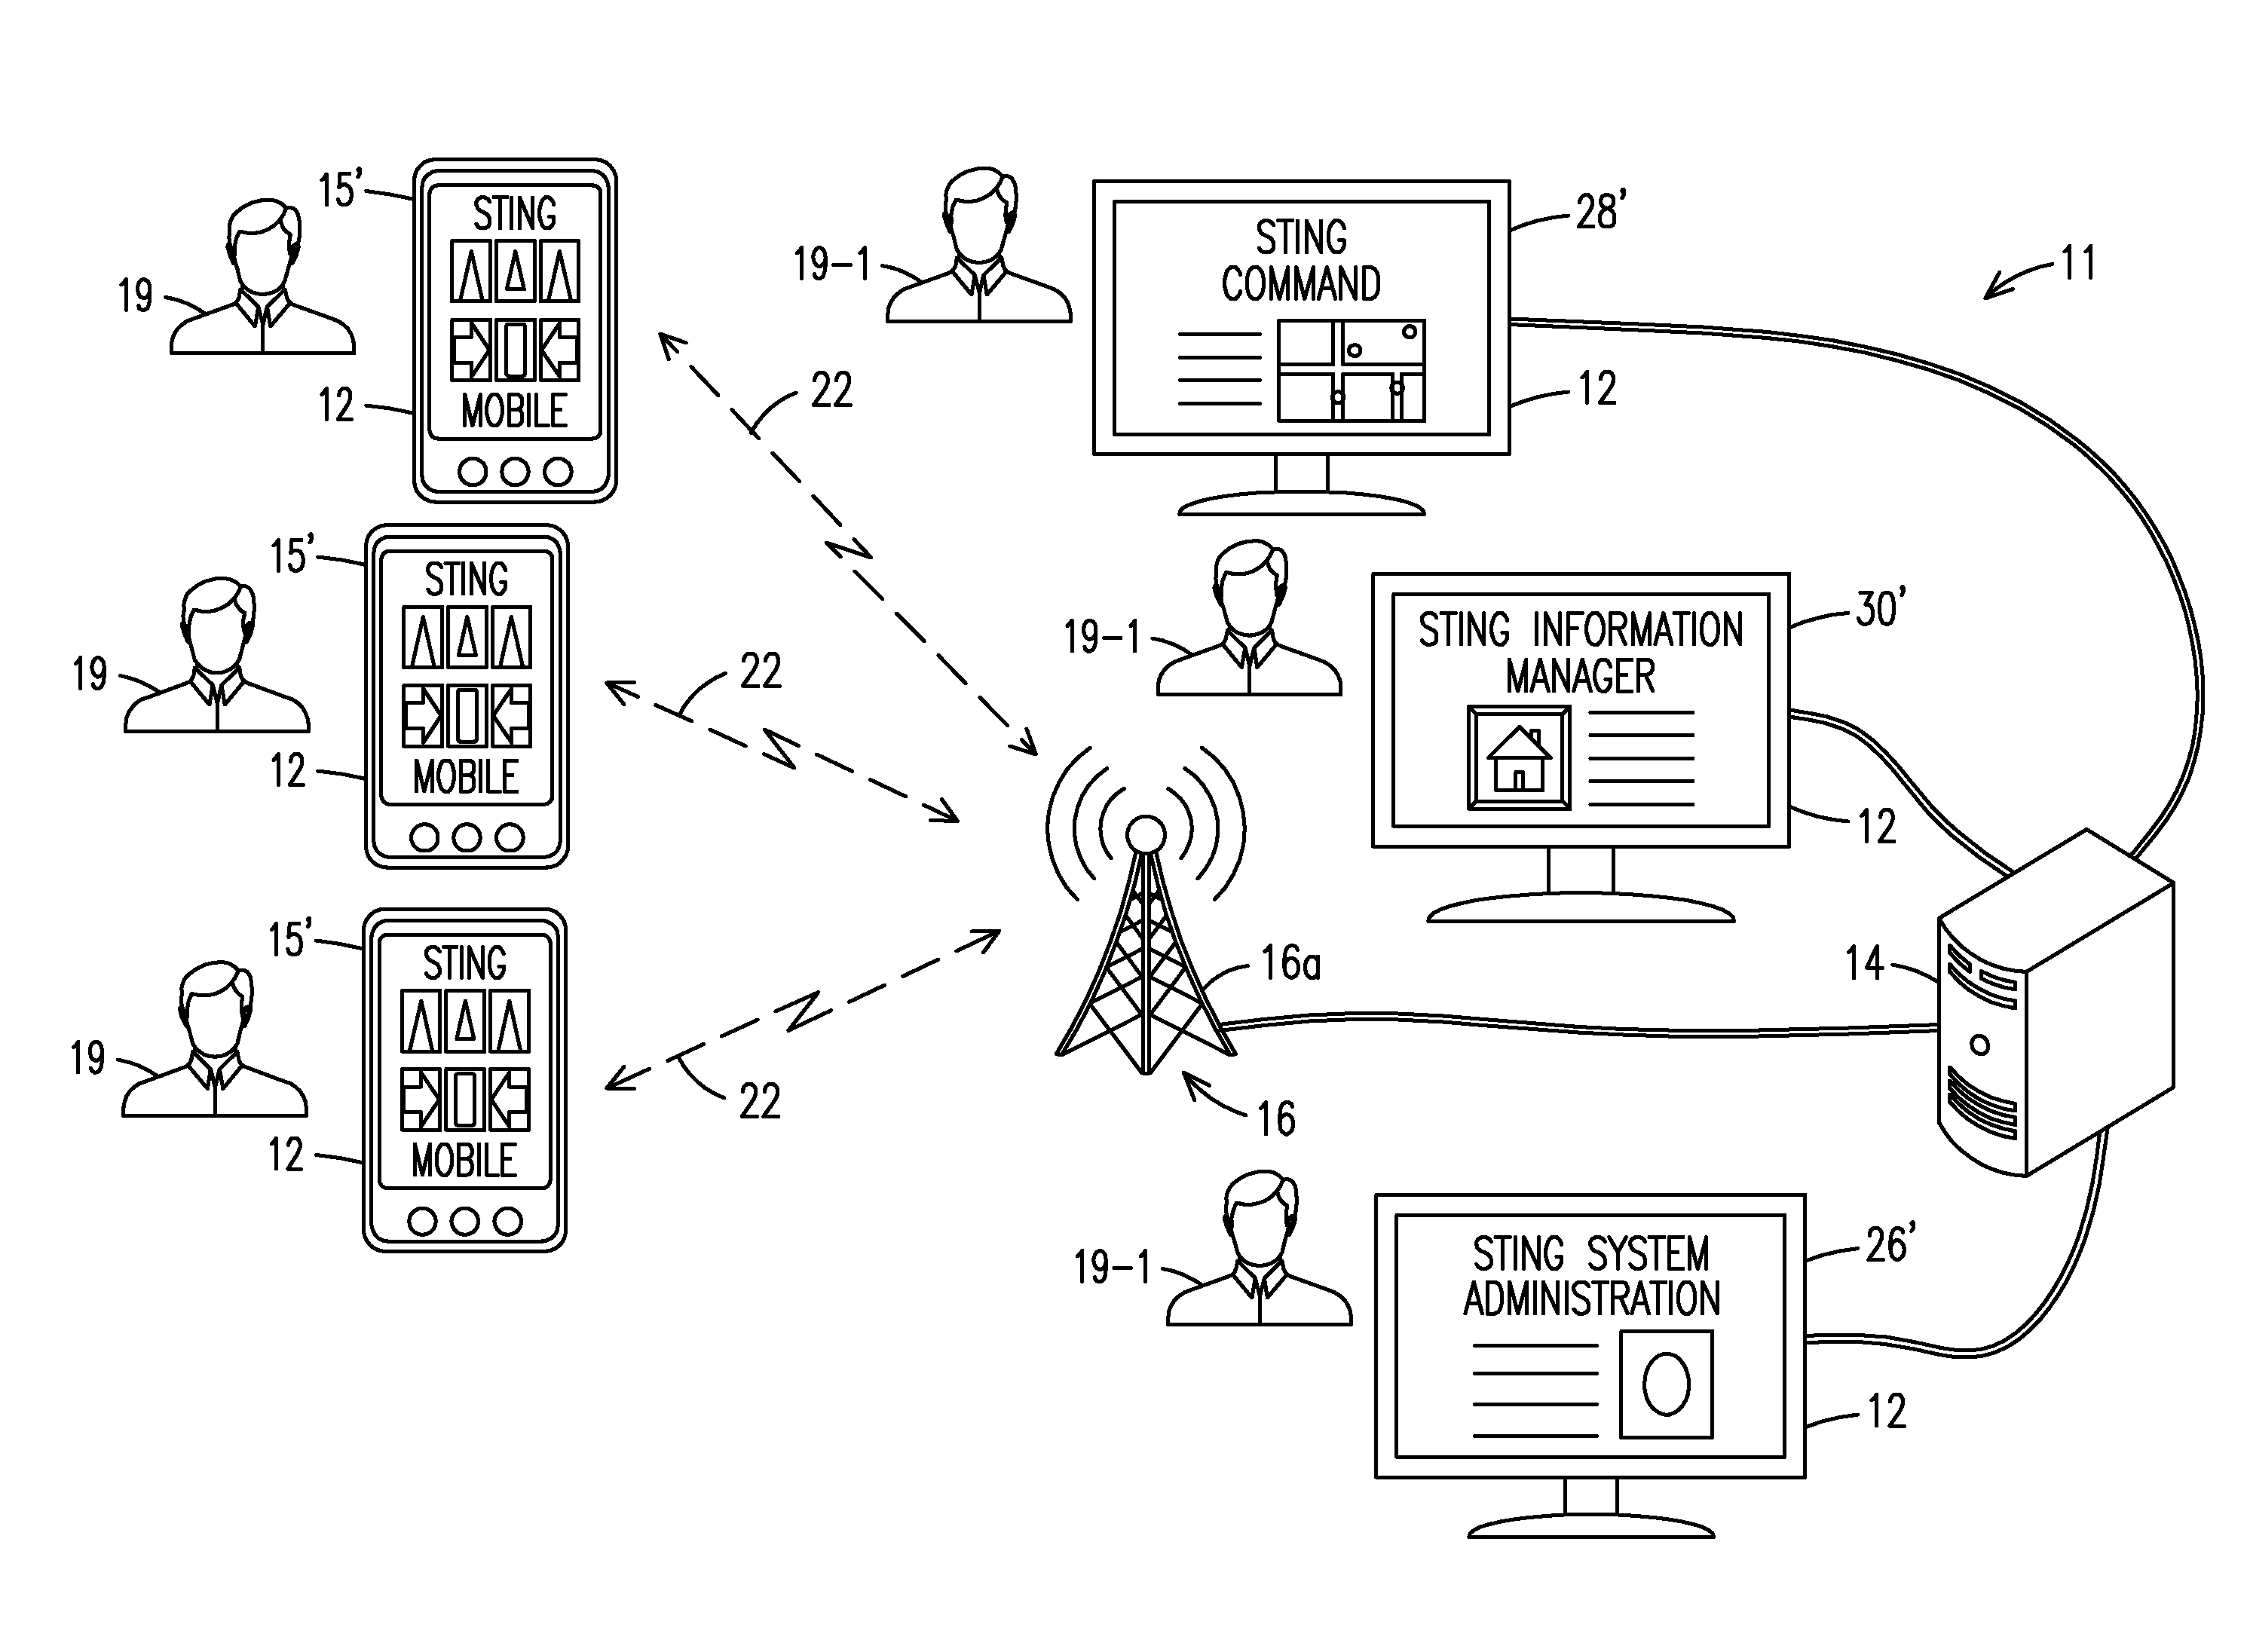 Distributed Processing Network System, Integrated Response Systems and Methods Providing Situational Awareness Information For Emergency Response